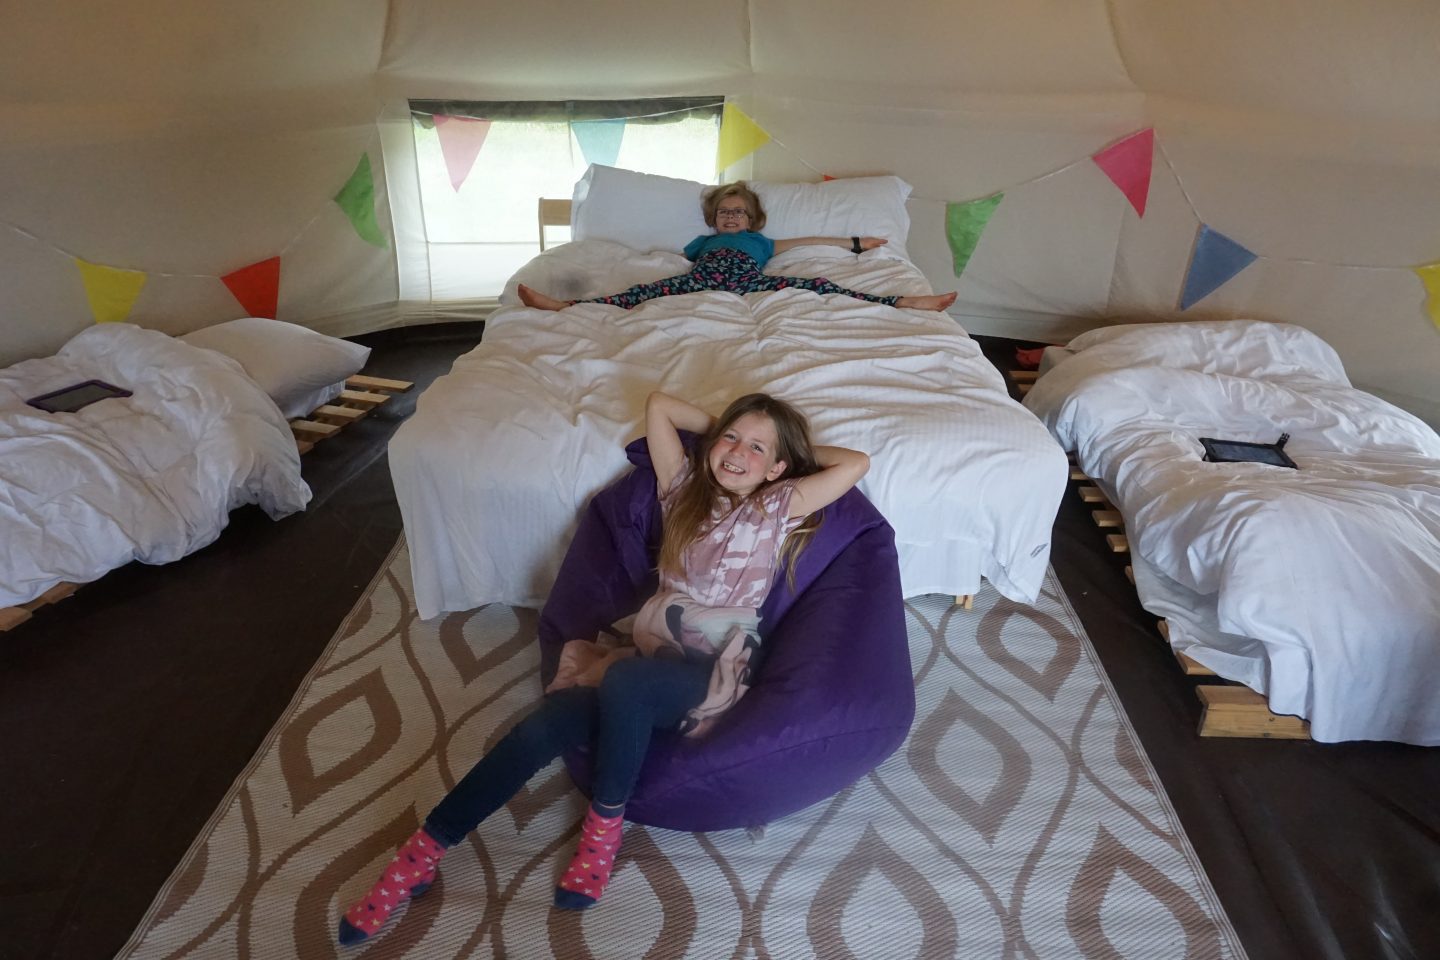 Inside of a bell tent at YHA Eden Project campsite with double bed and two single beds. Girl lying on double bed and another girl sitting on a beanbag in front of it. 